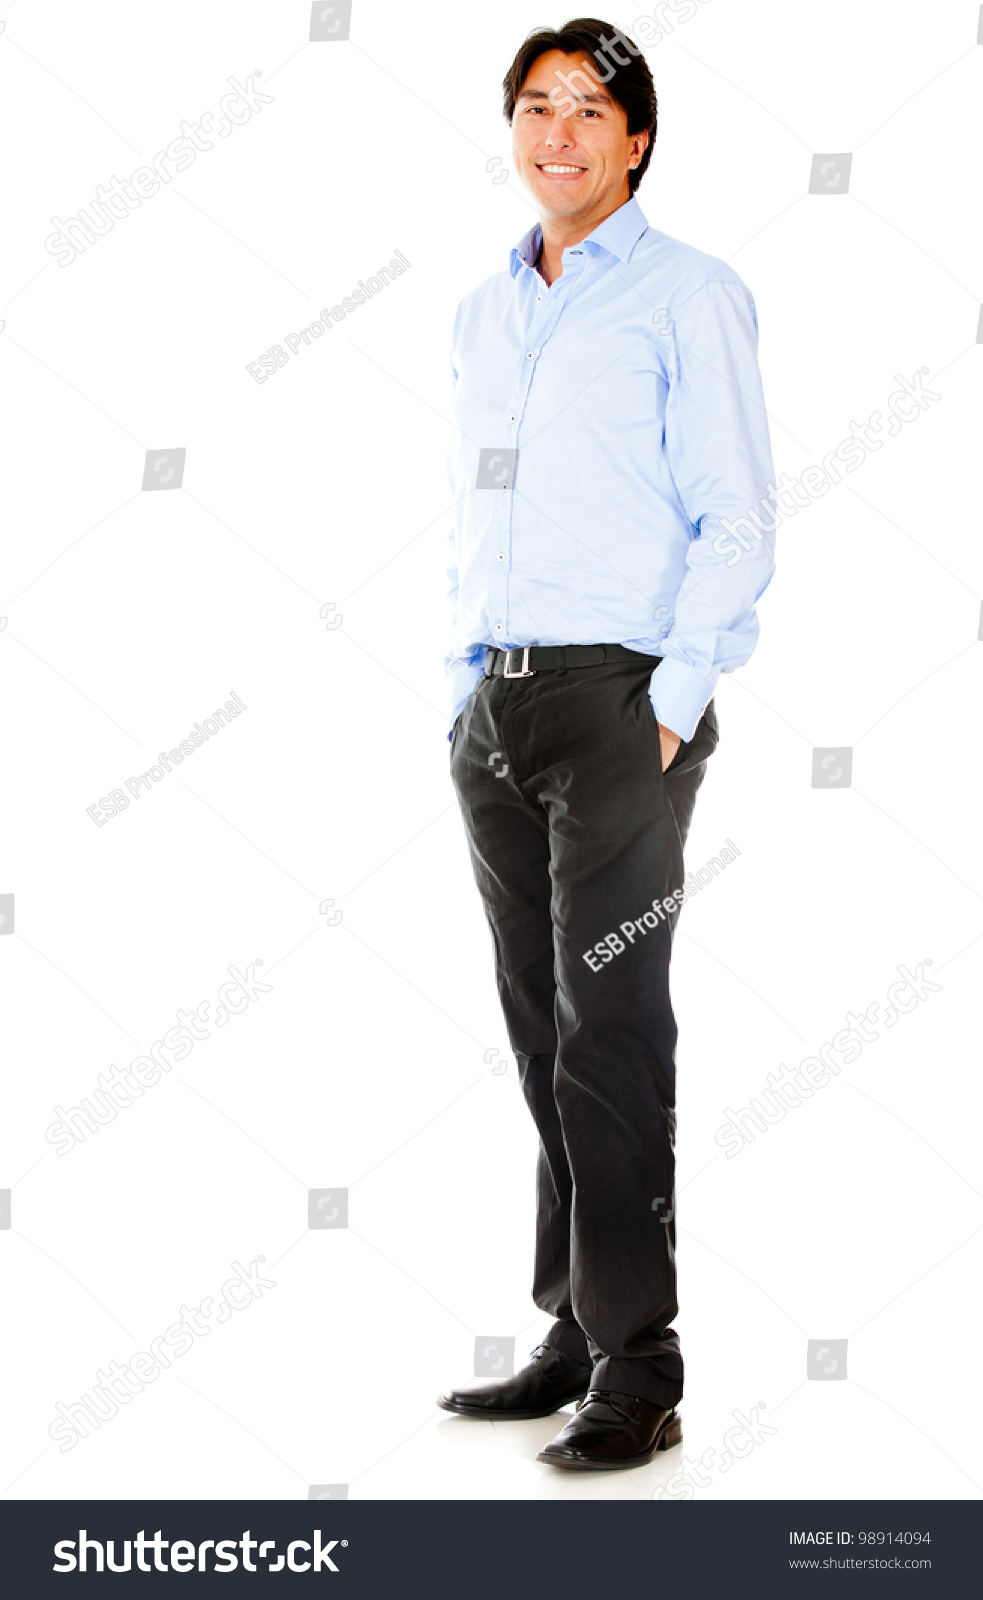 Casual businessman standing - isolated over a white background #98914094